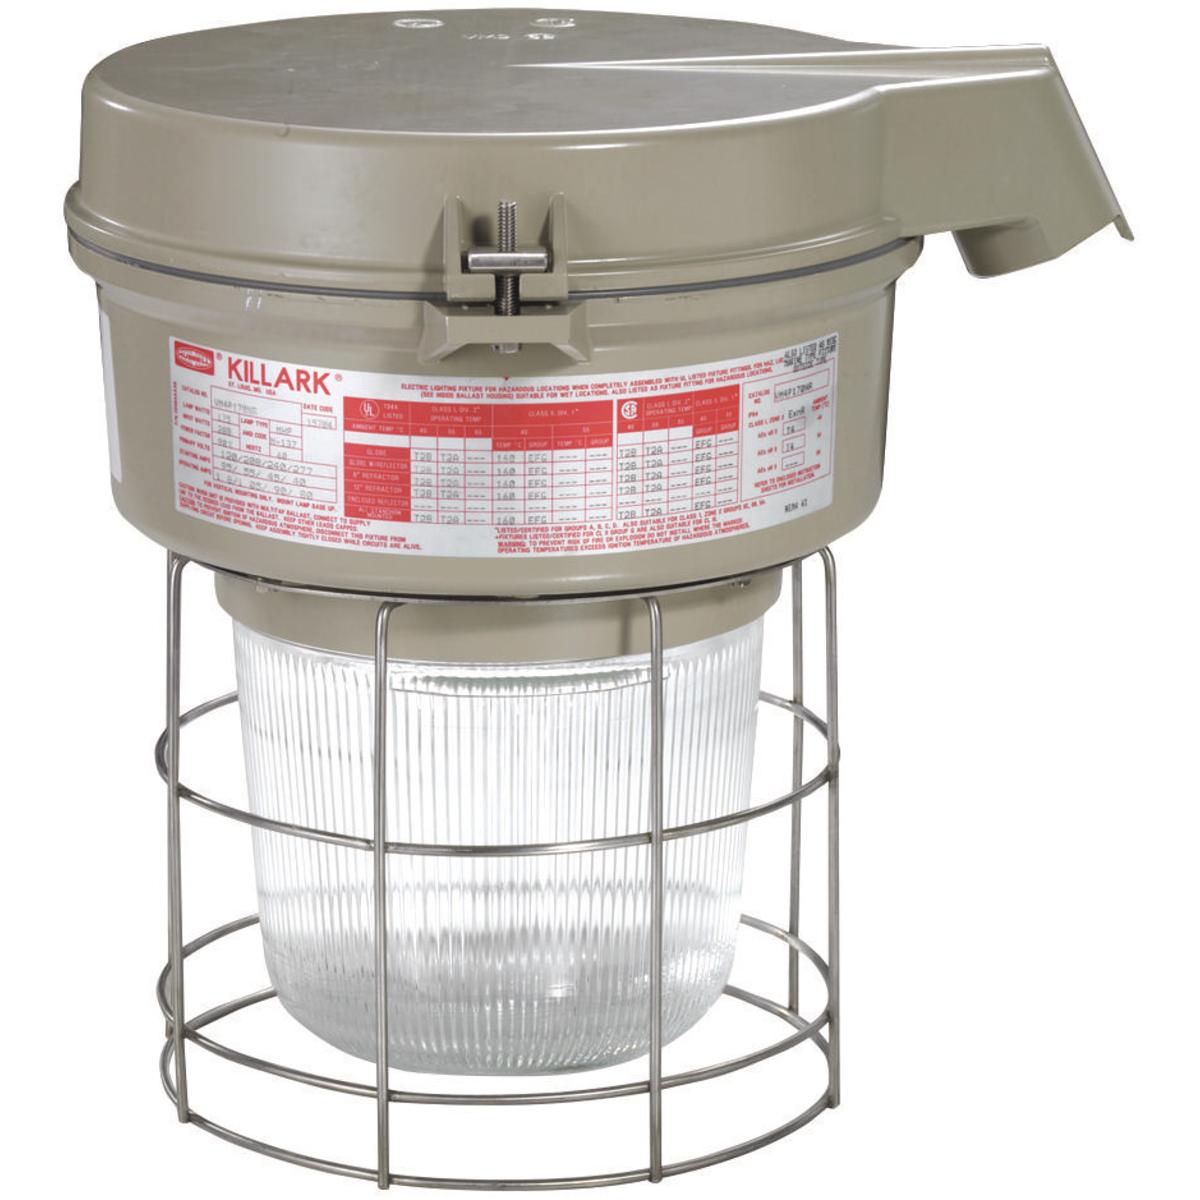 Hubbell VM4P175D5R1G VM4 Series - 175W Metal Halide 480V - 1-1/2" Stanchion 25° - Type I Glass Refractor and Guard  ; Ballast tank and splice box – corrosion resistant copper-free aluminum alloy with baked powder epoxy/polyester finish, electrostatically applied for complete,